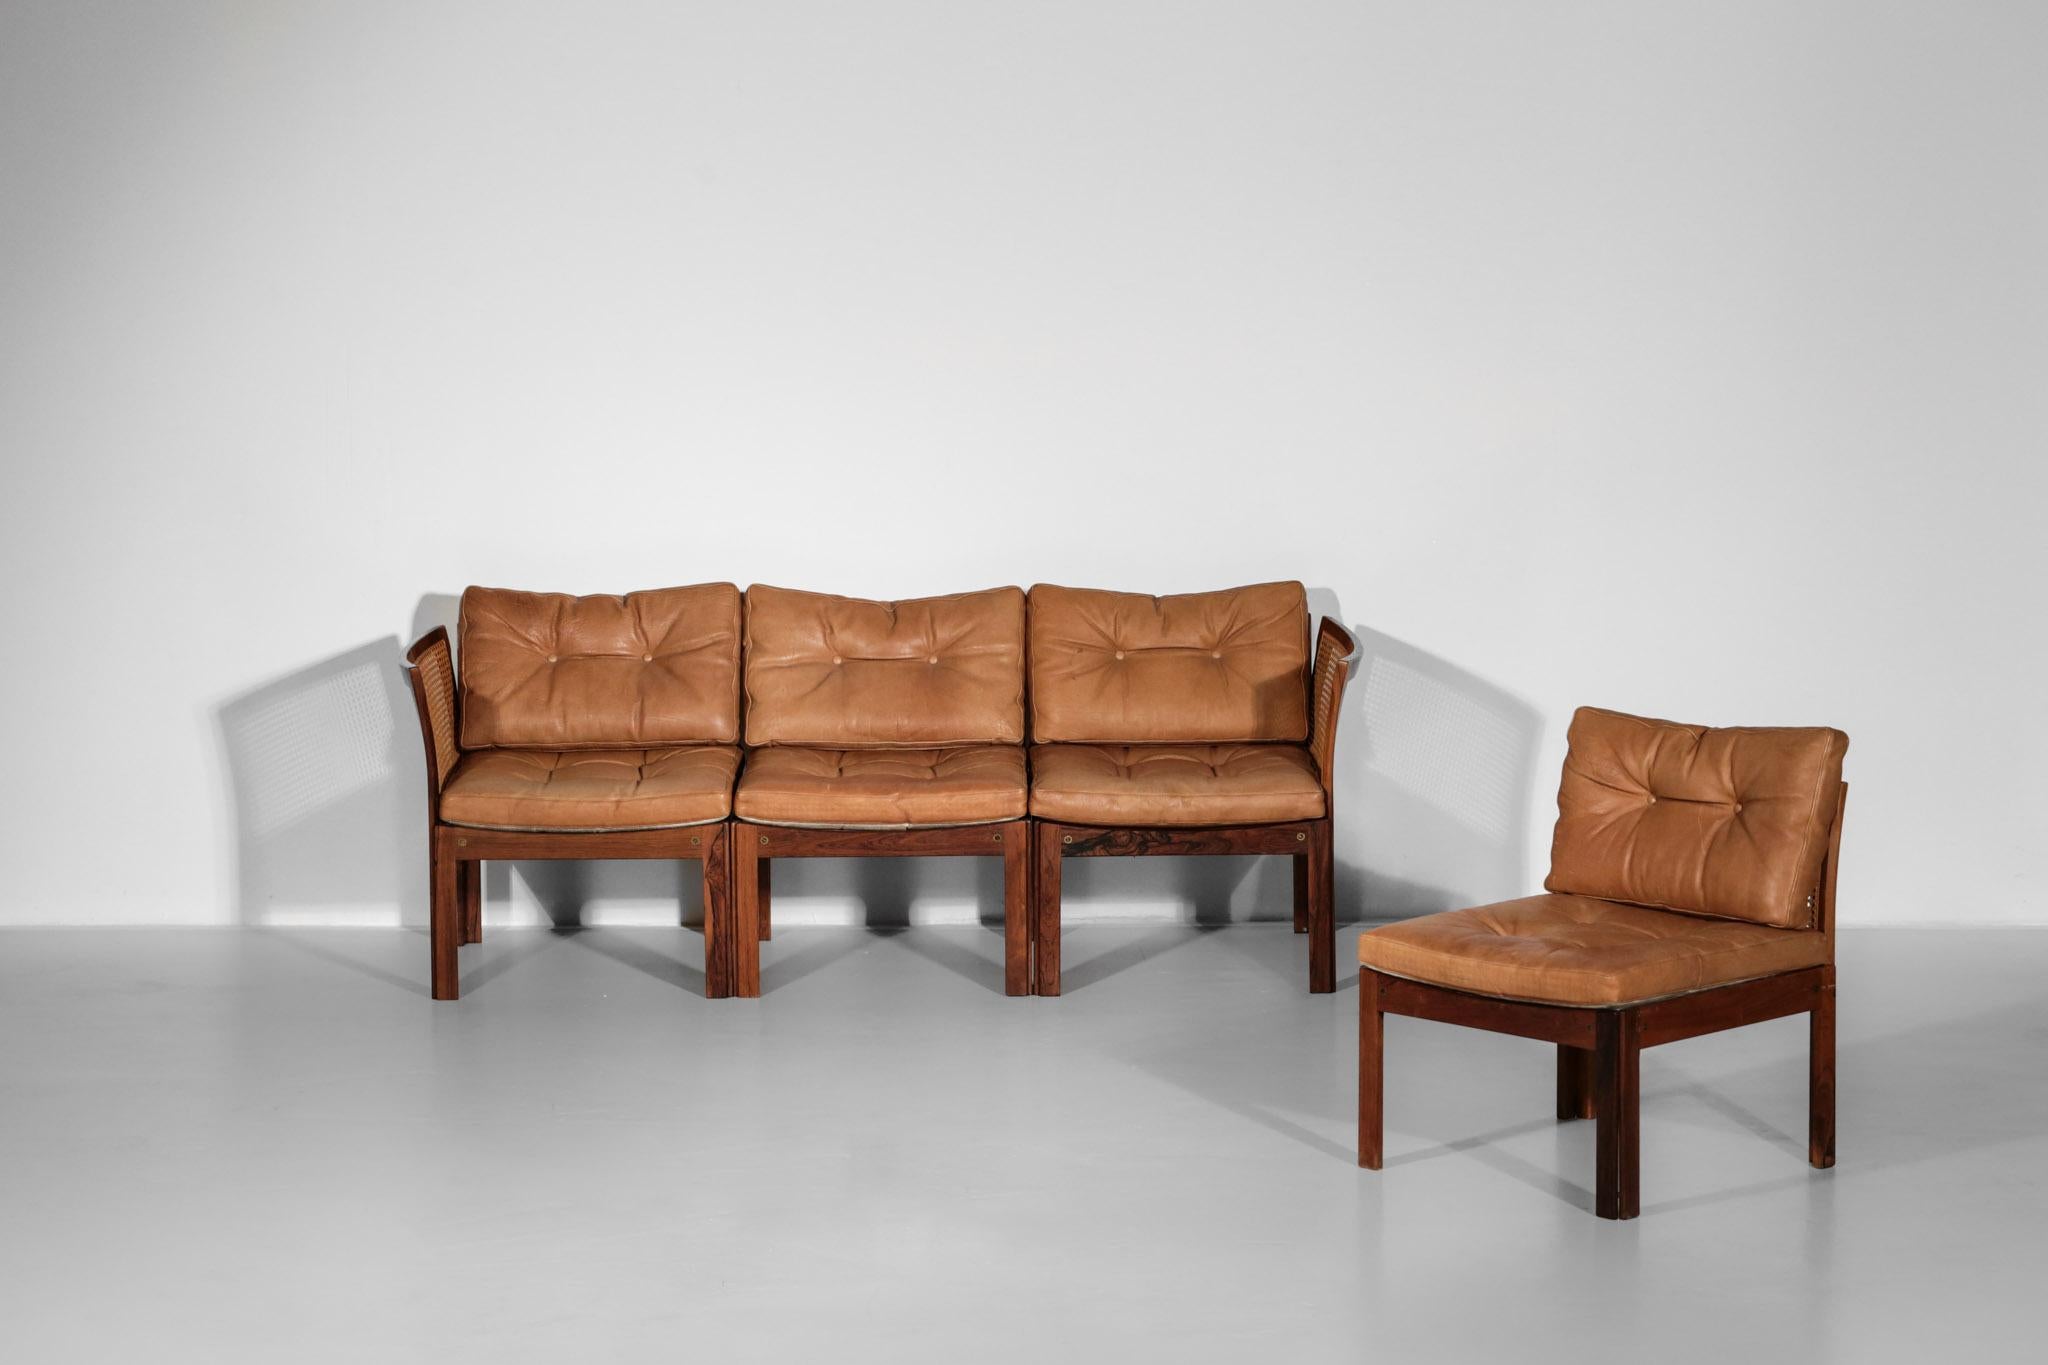 Illum Wikkelso Leather Sofa in Rosewood and Woven Rattan Cane For Sale 10